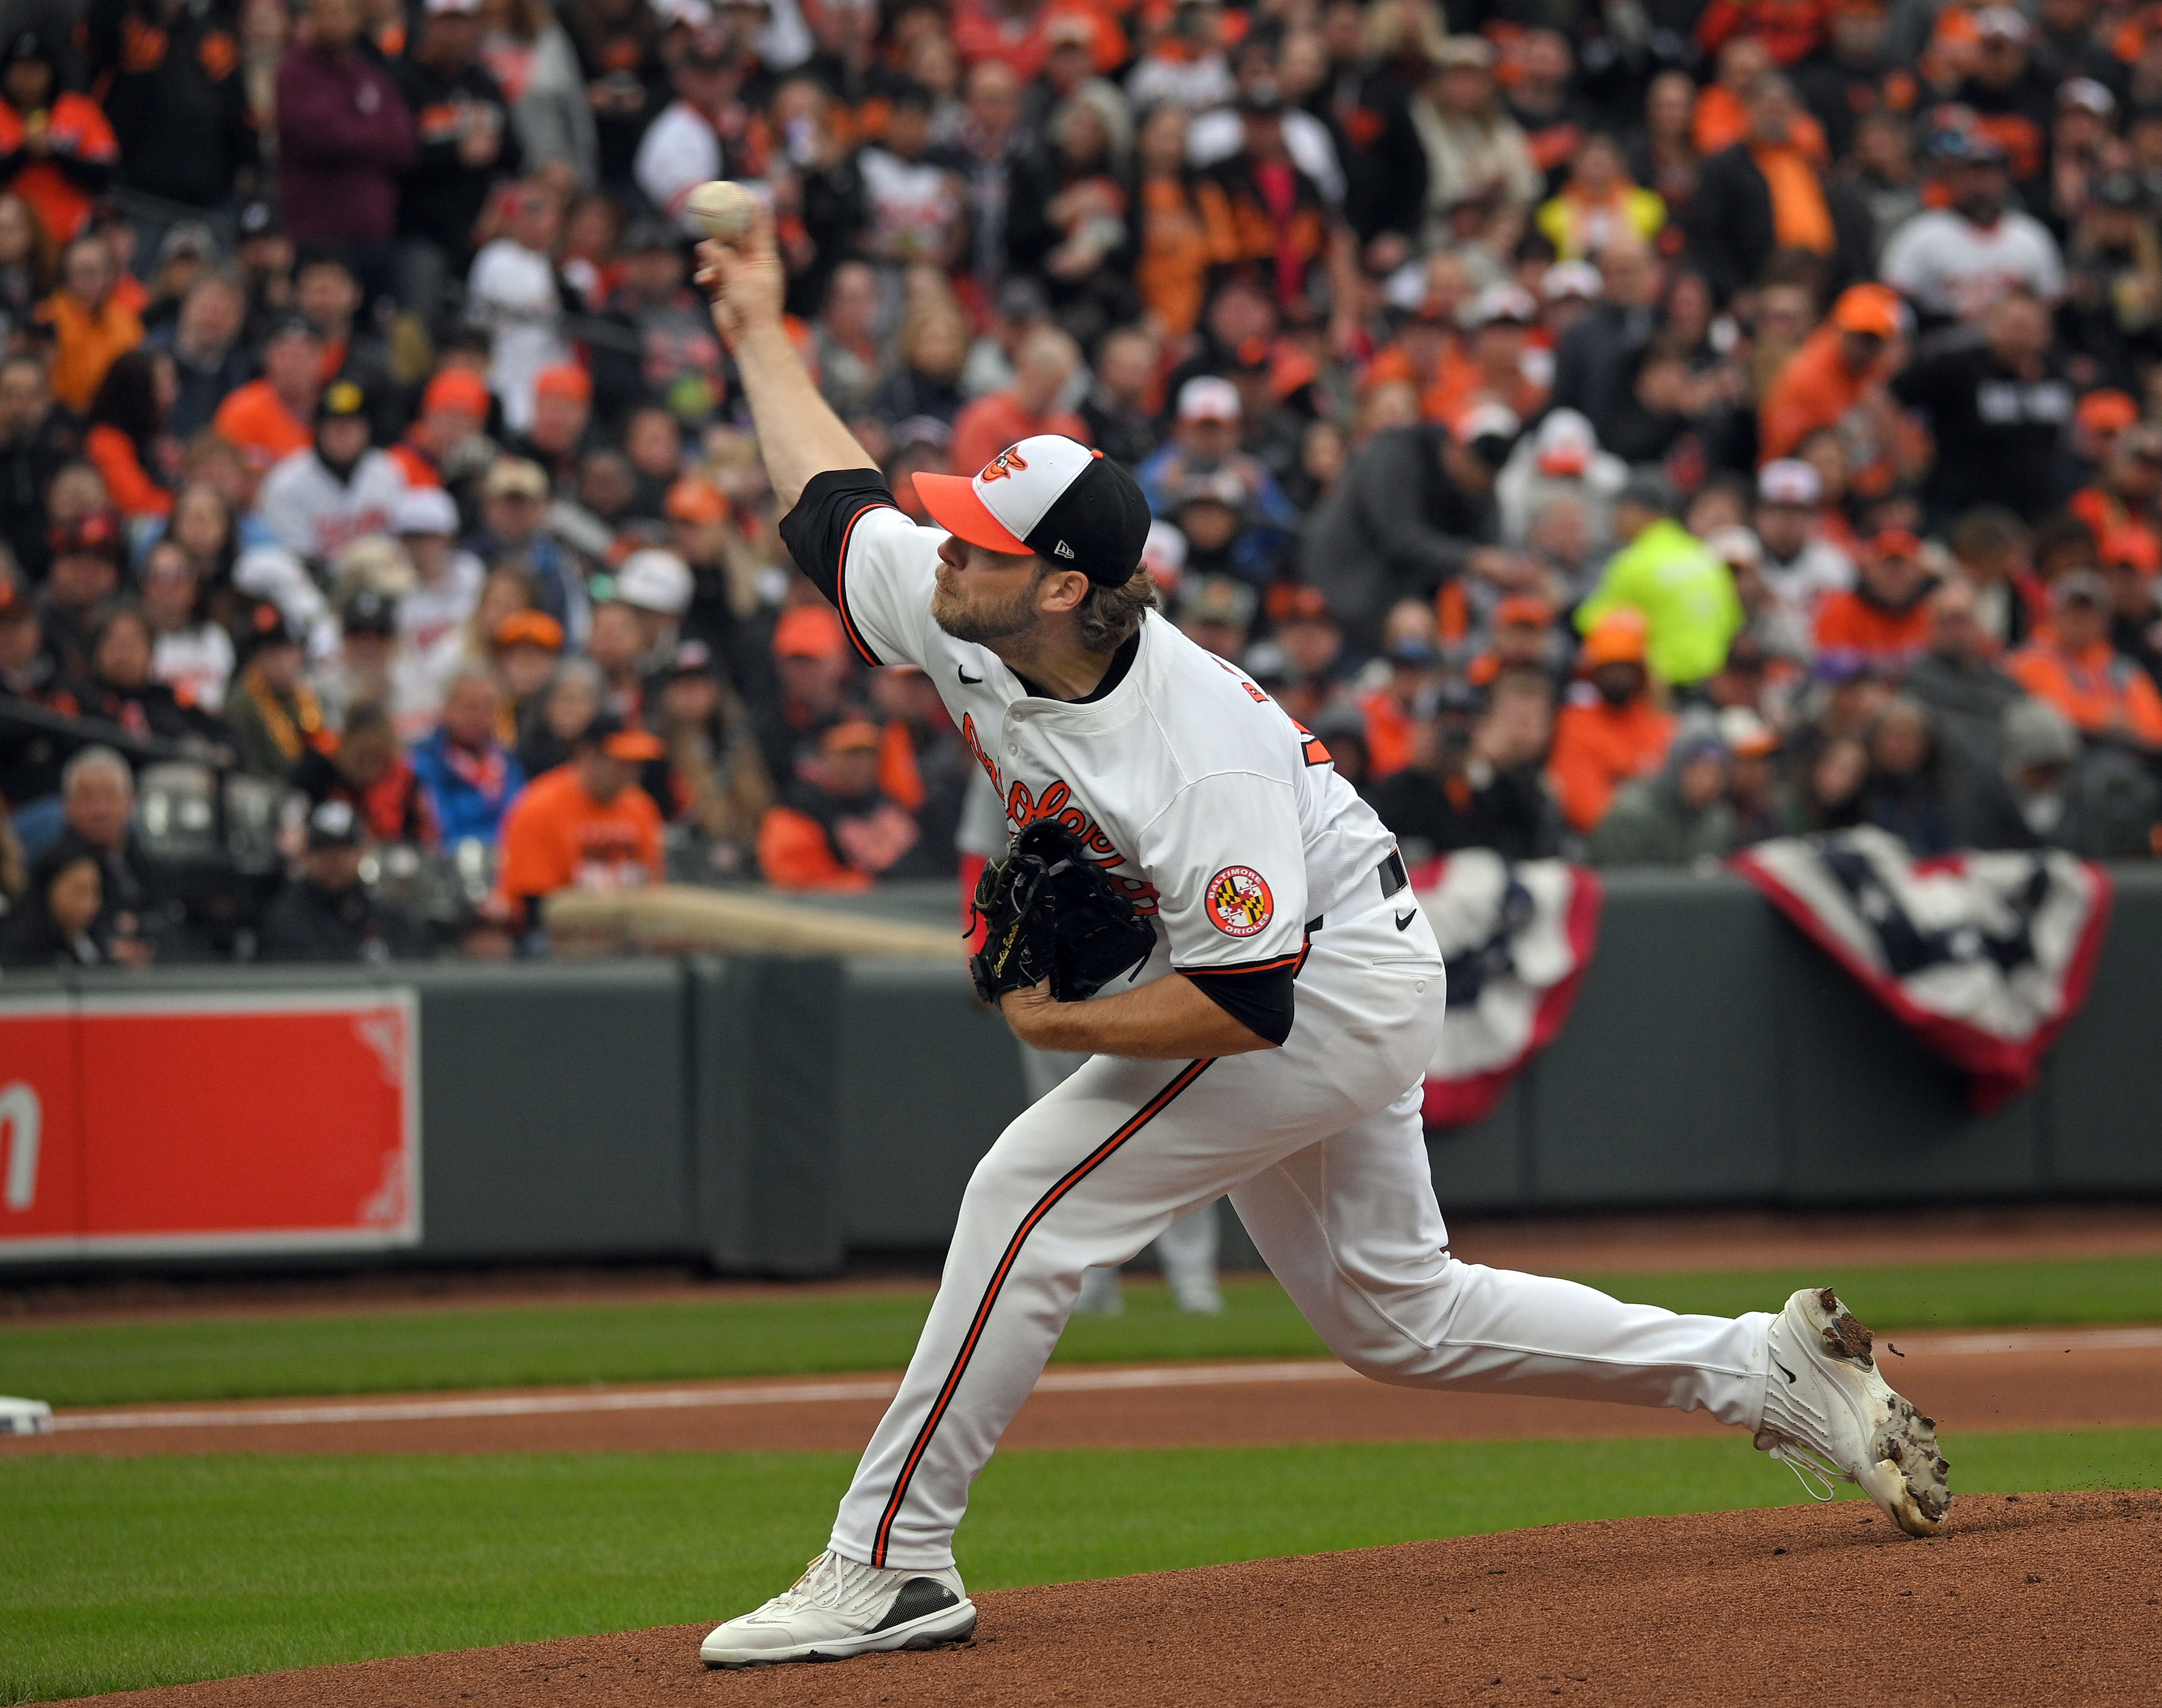 Mar 28, 2024: Orioles starter Corbin Burnes pitches against the Angels in the first inning of 2024 season opener at Oriole Park at Camden Yards. (Kenneth K. Lam/Staff)